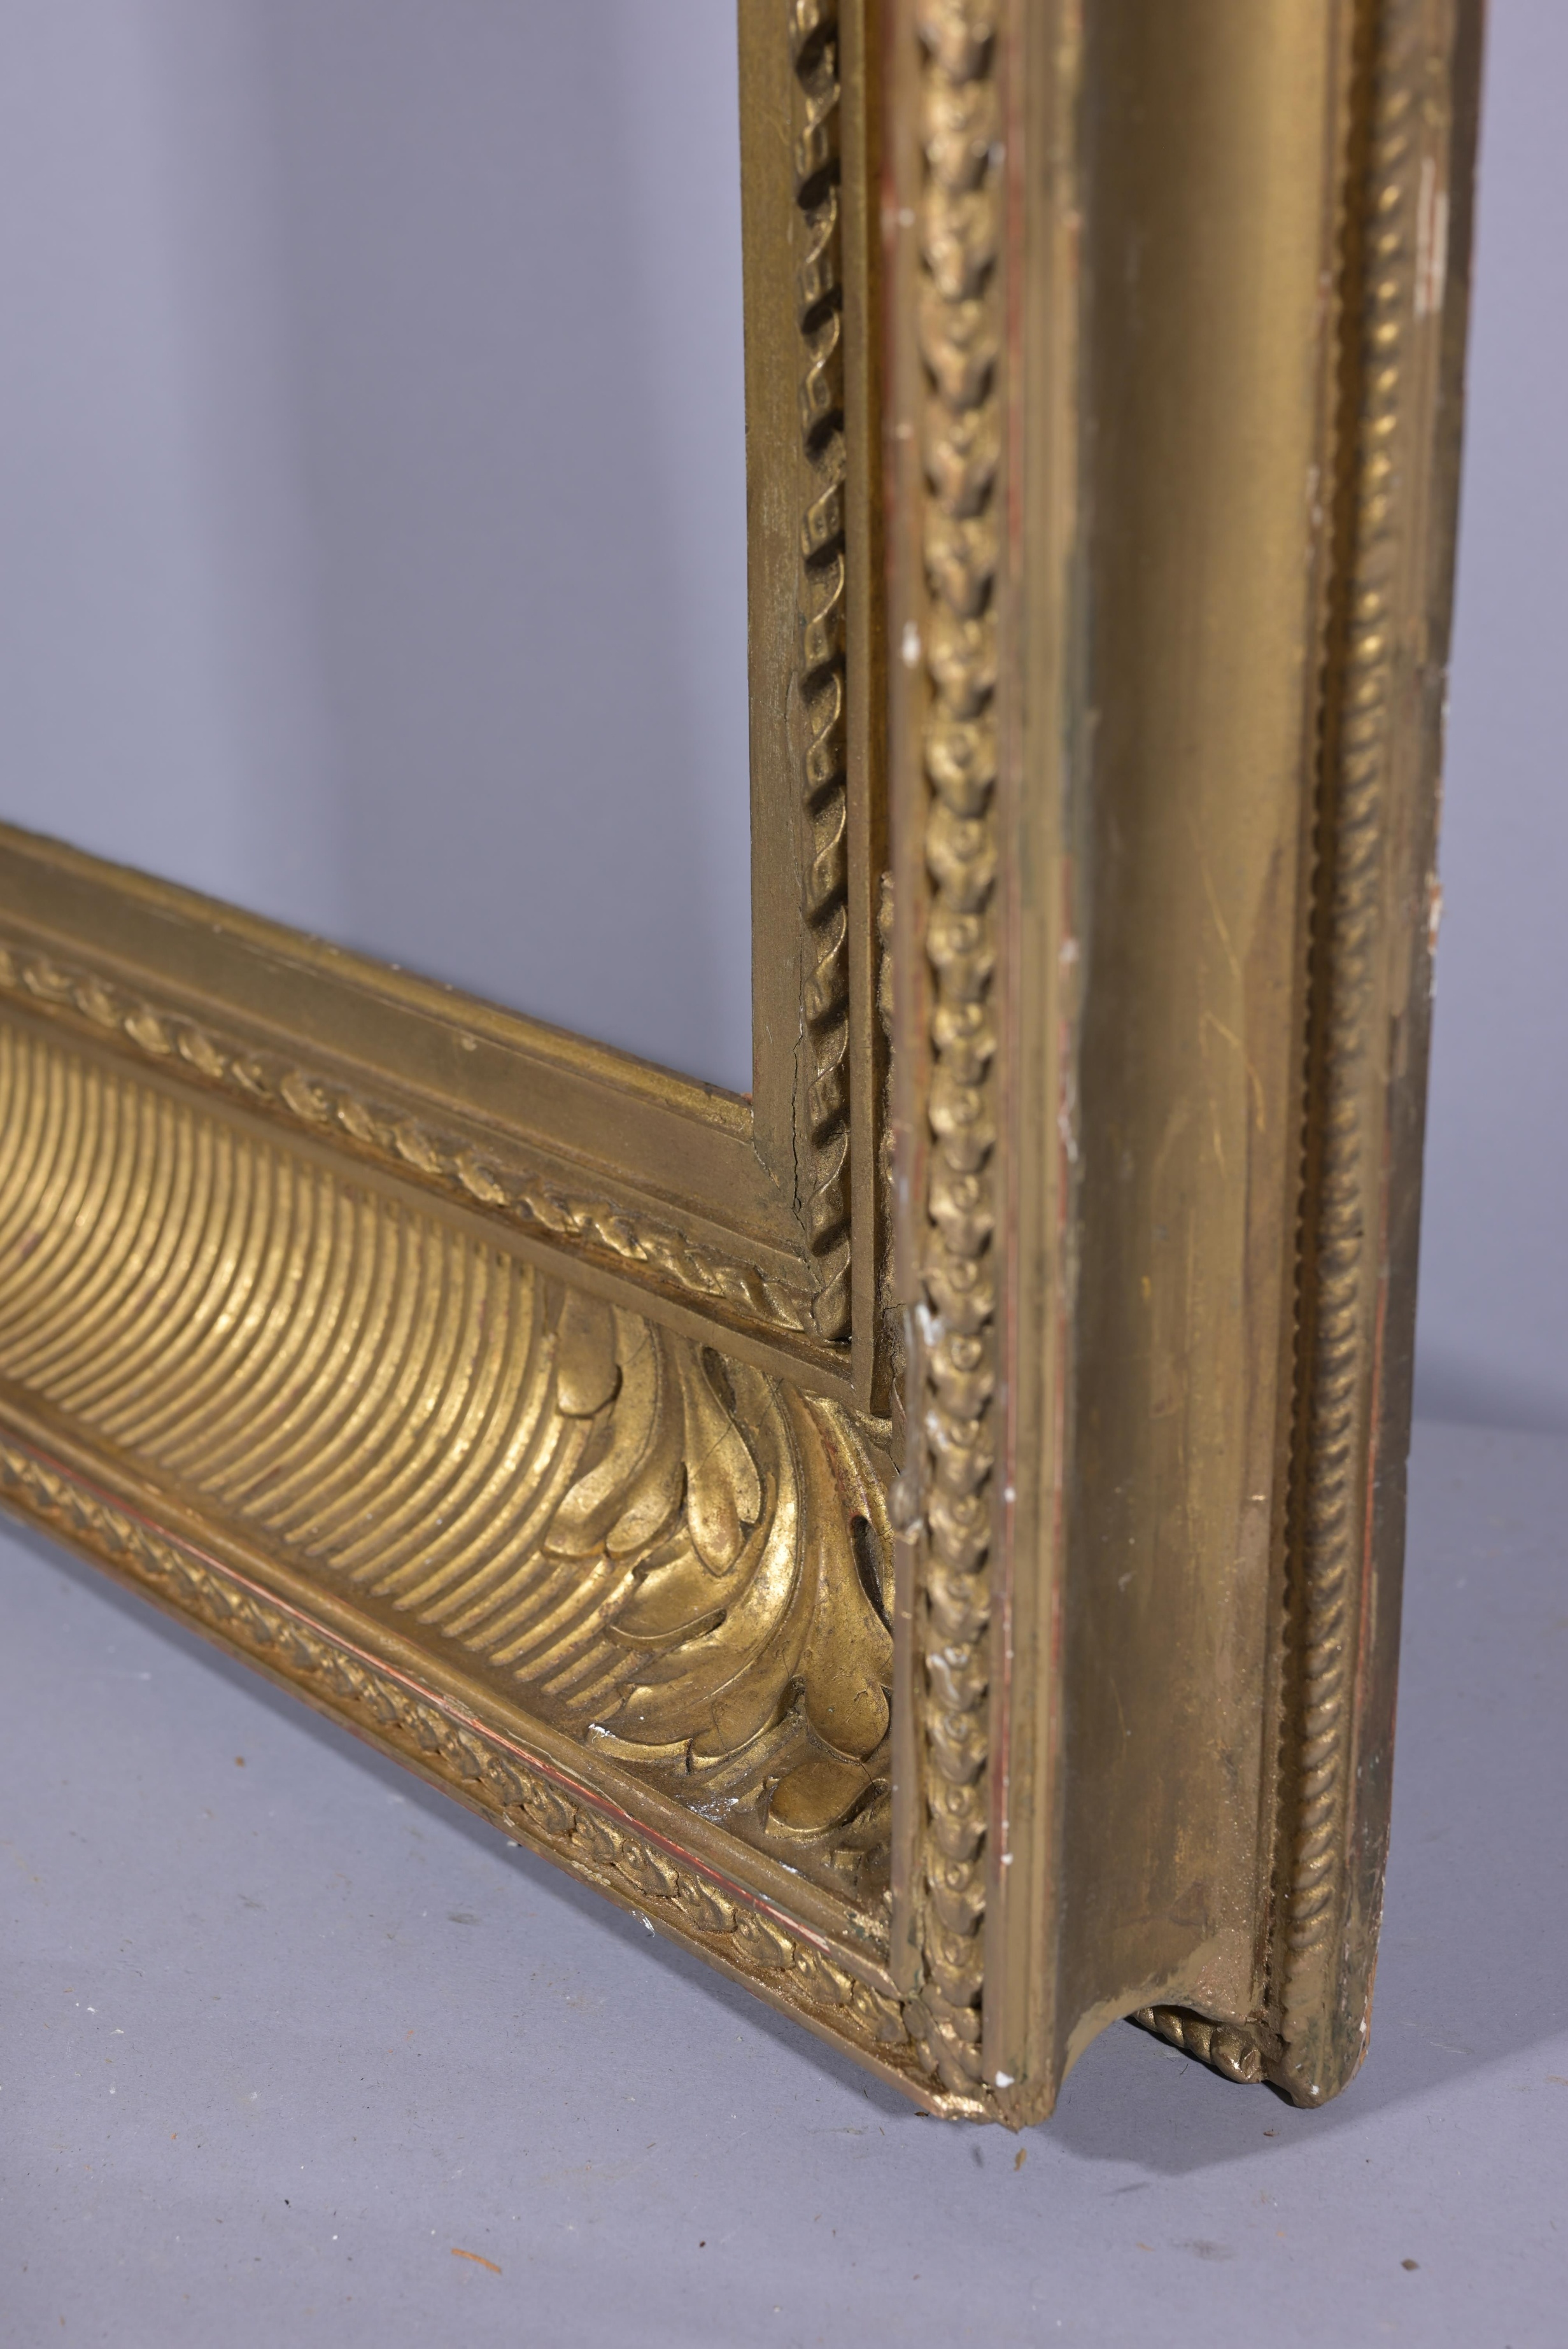 French 1860's Gilt Frame - 29.75 x 20.25 - Image 7 of 8